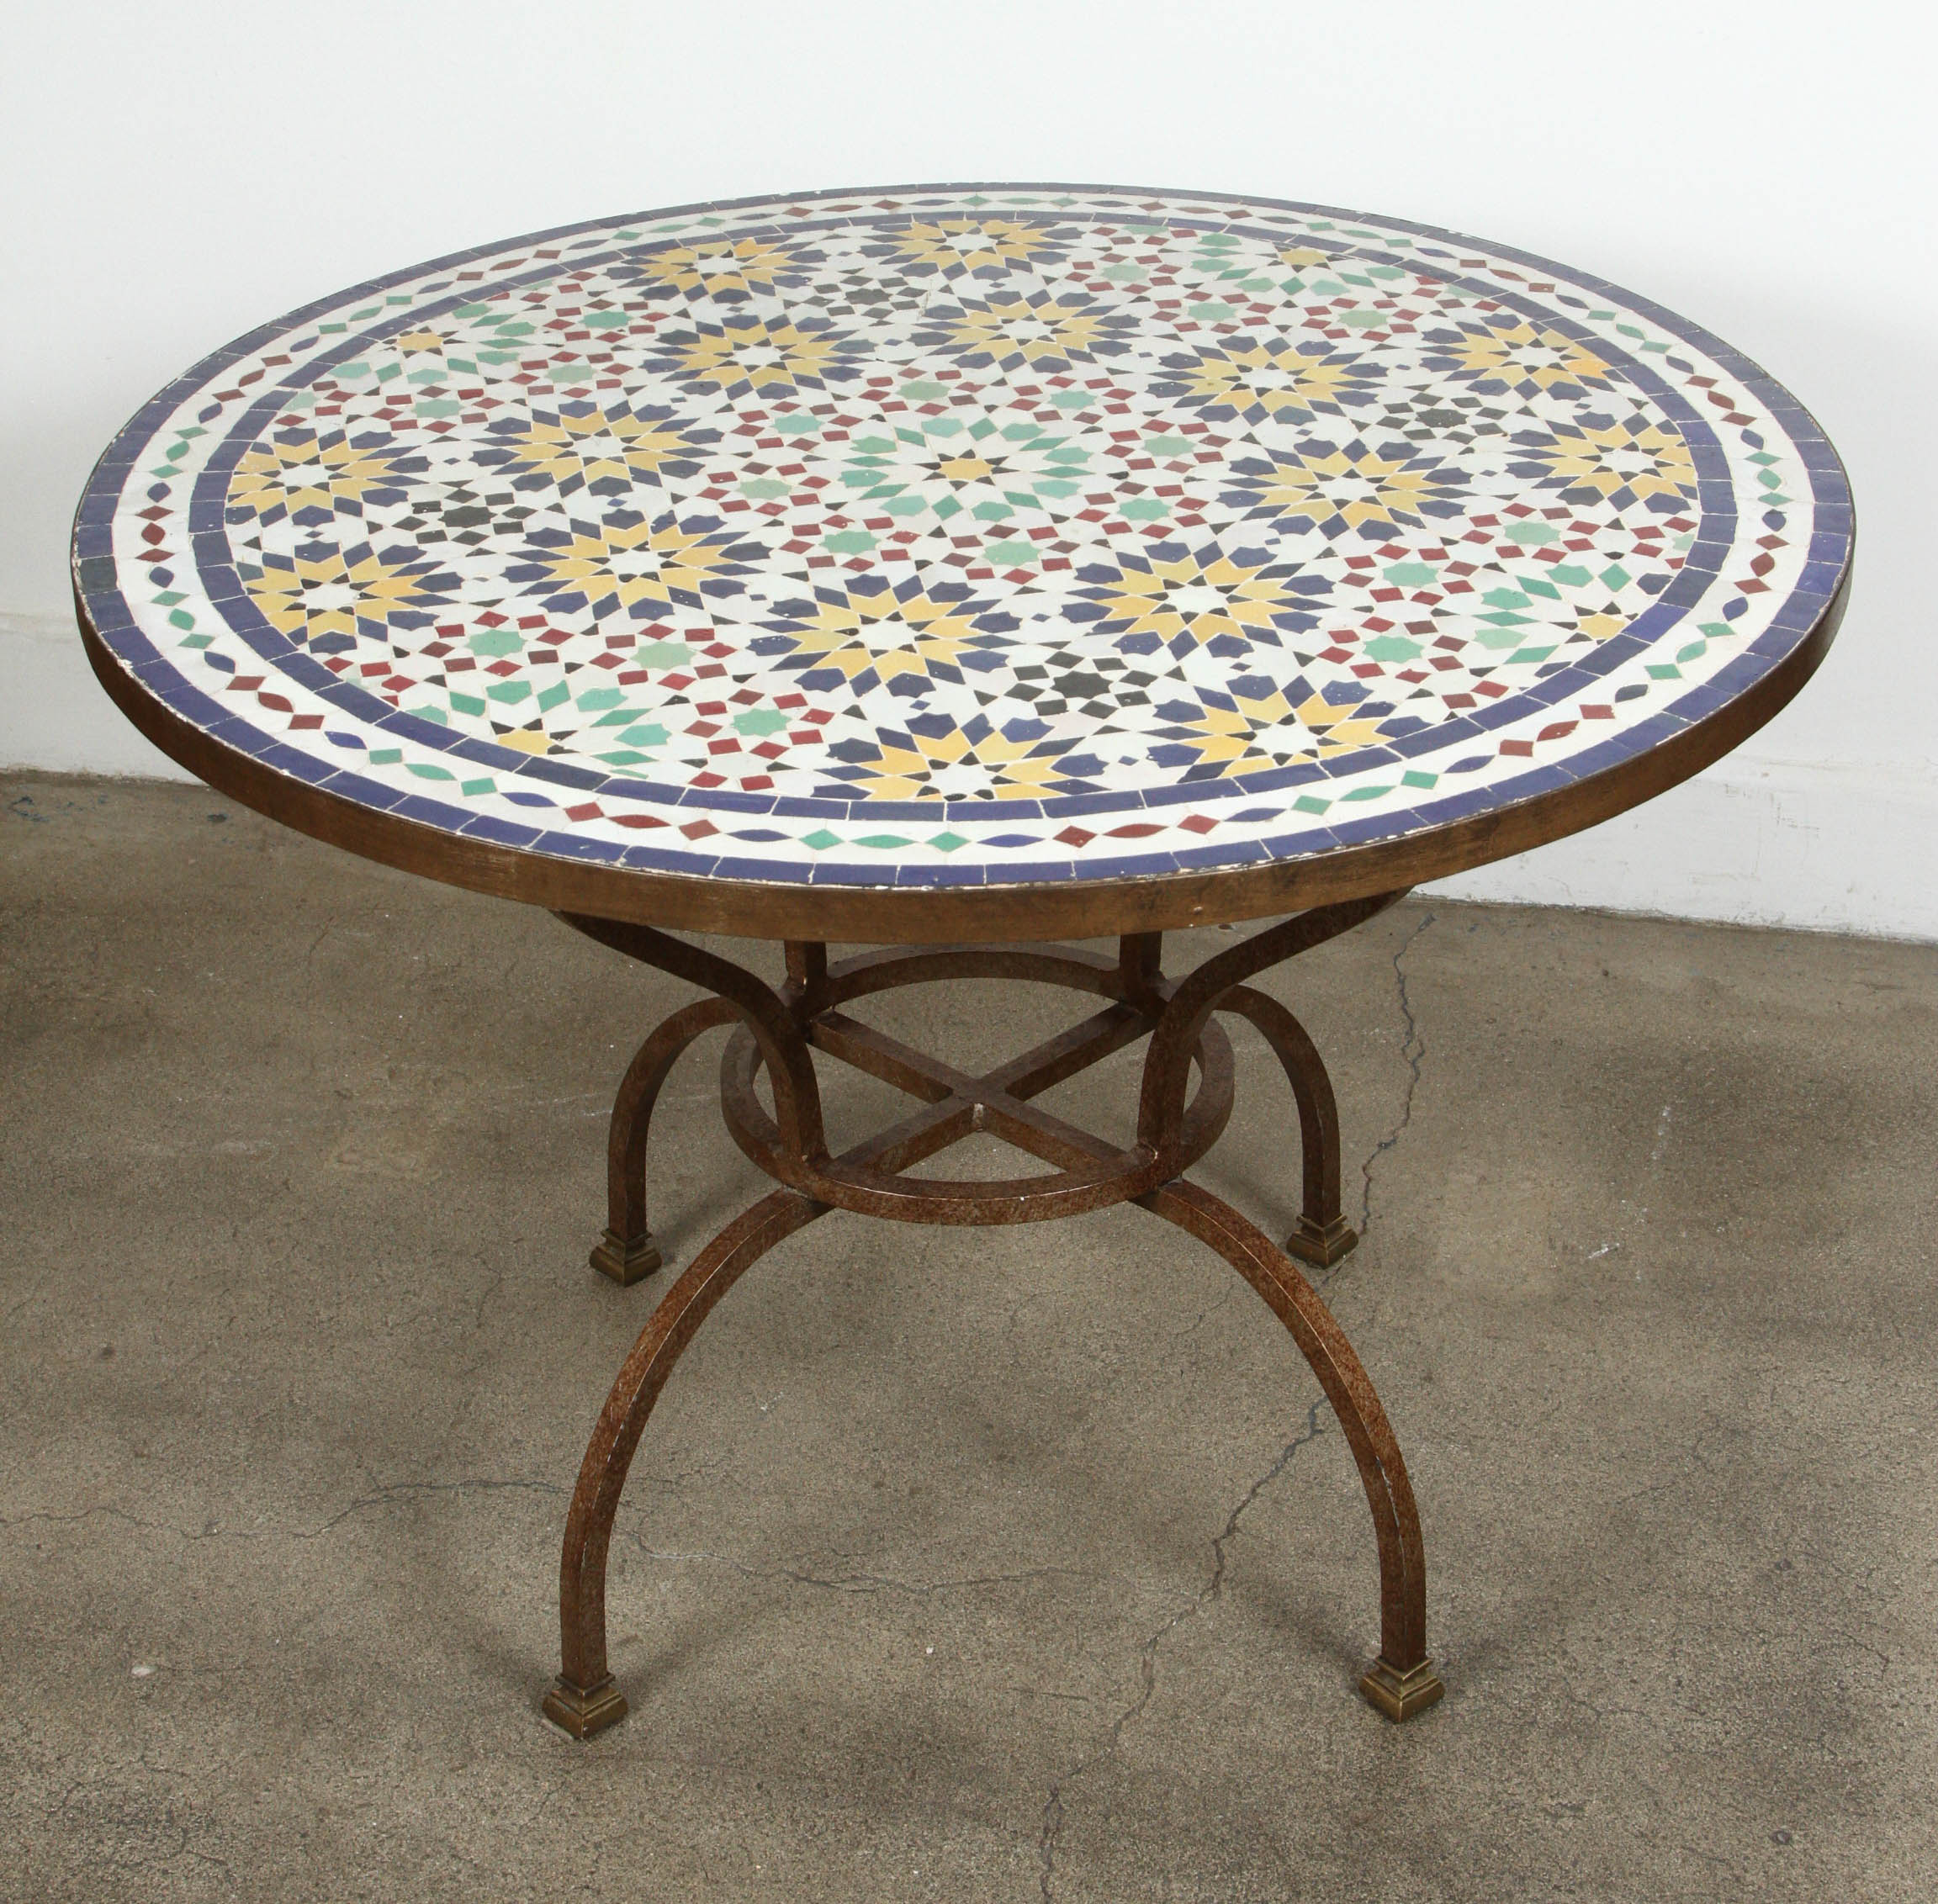 Moroccan Mosaic Tile Table from Fez